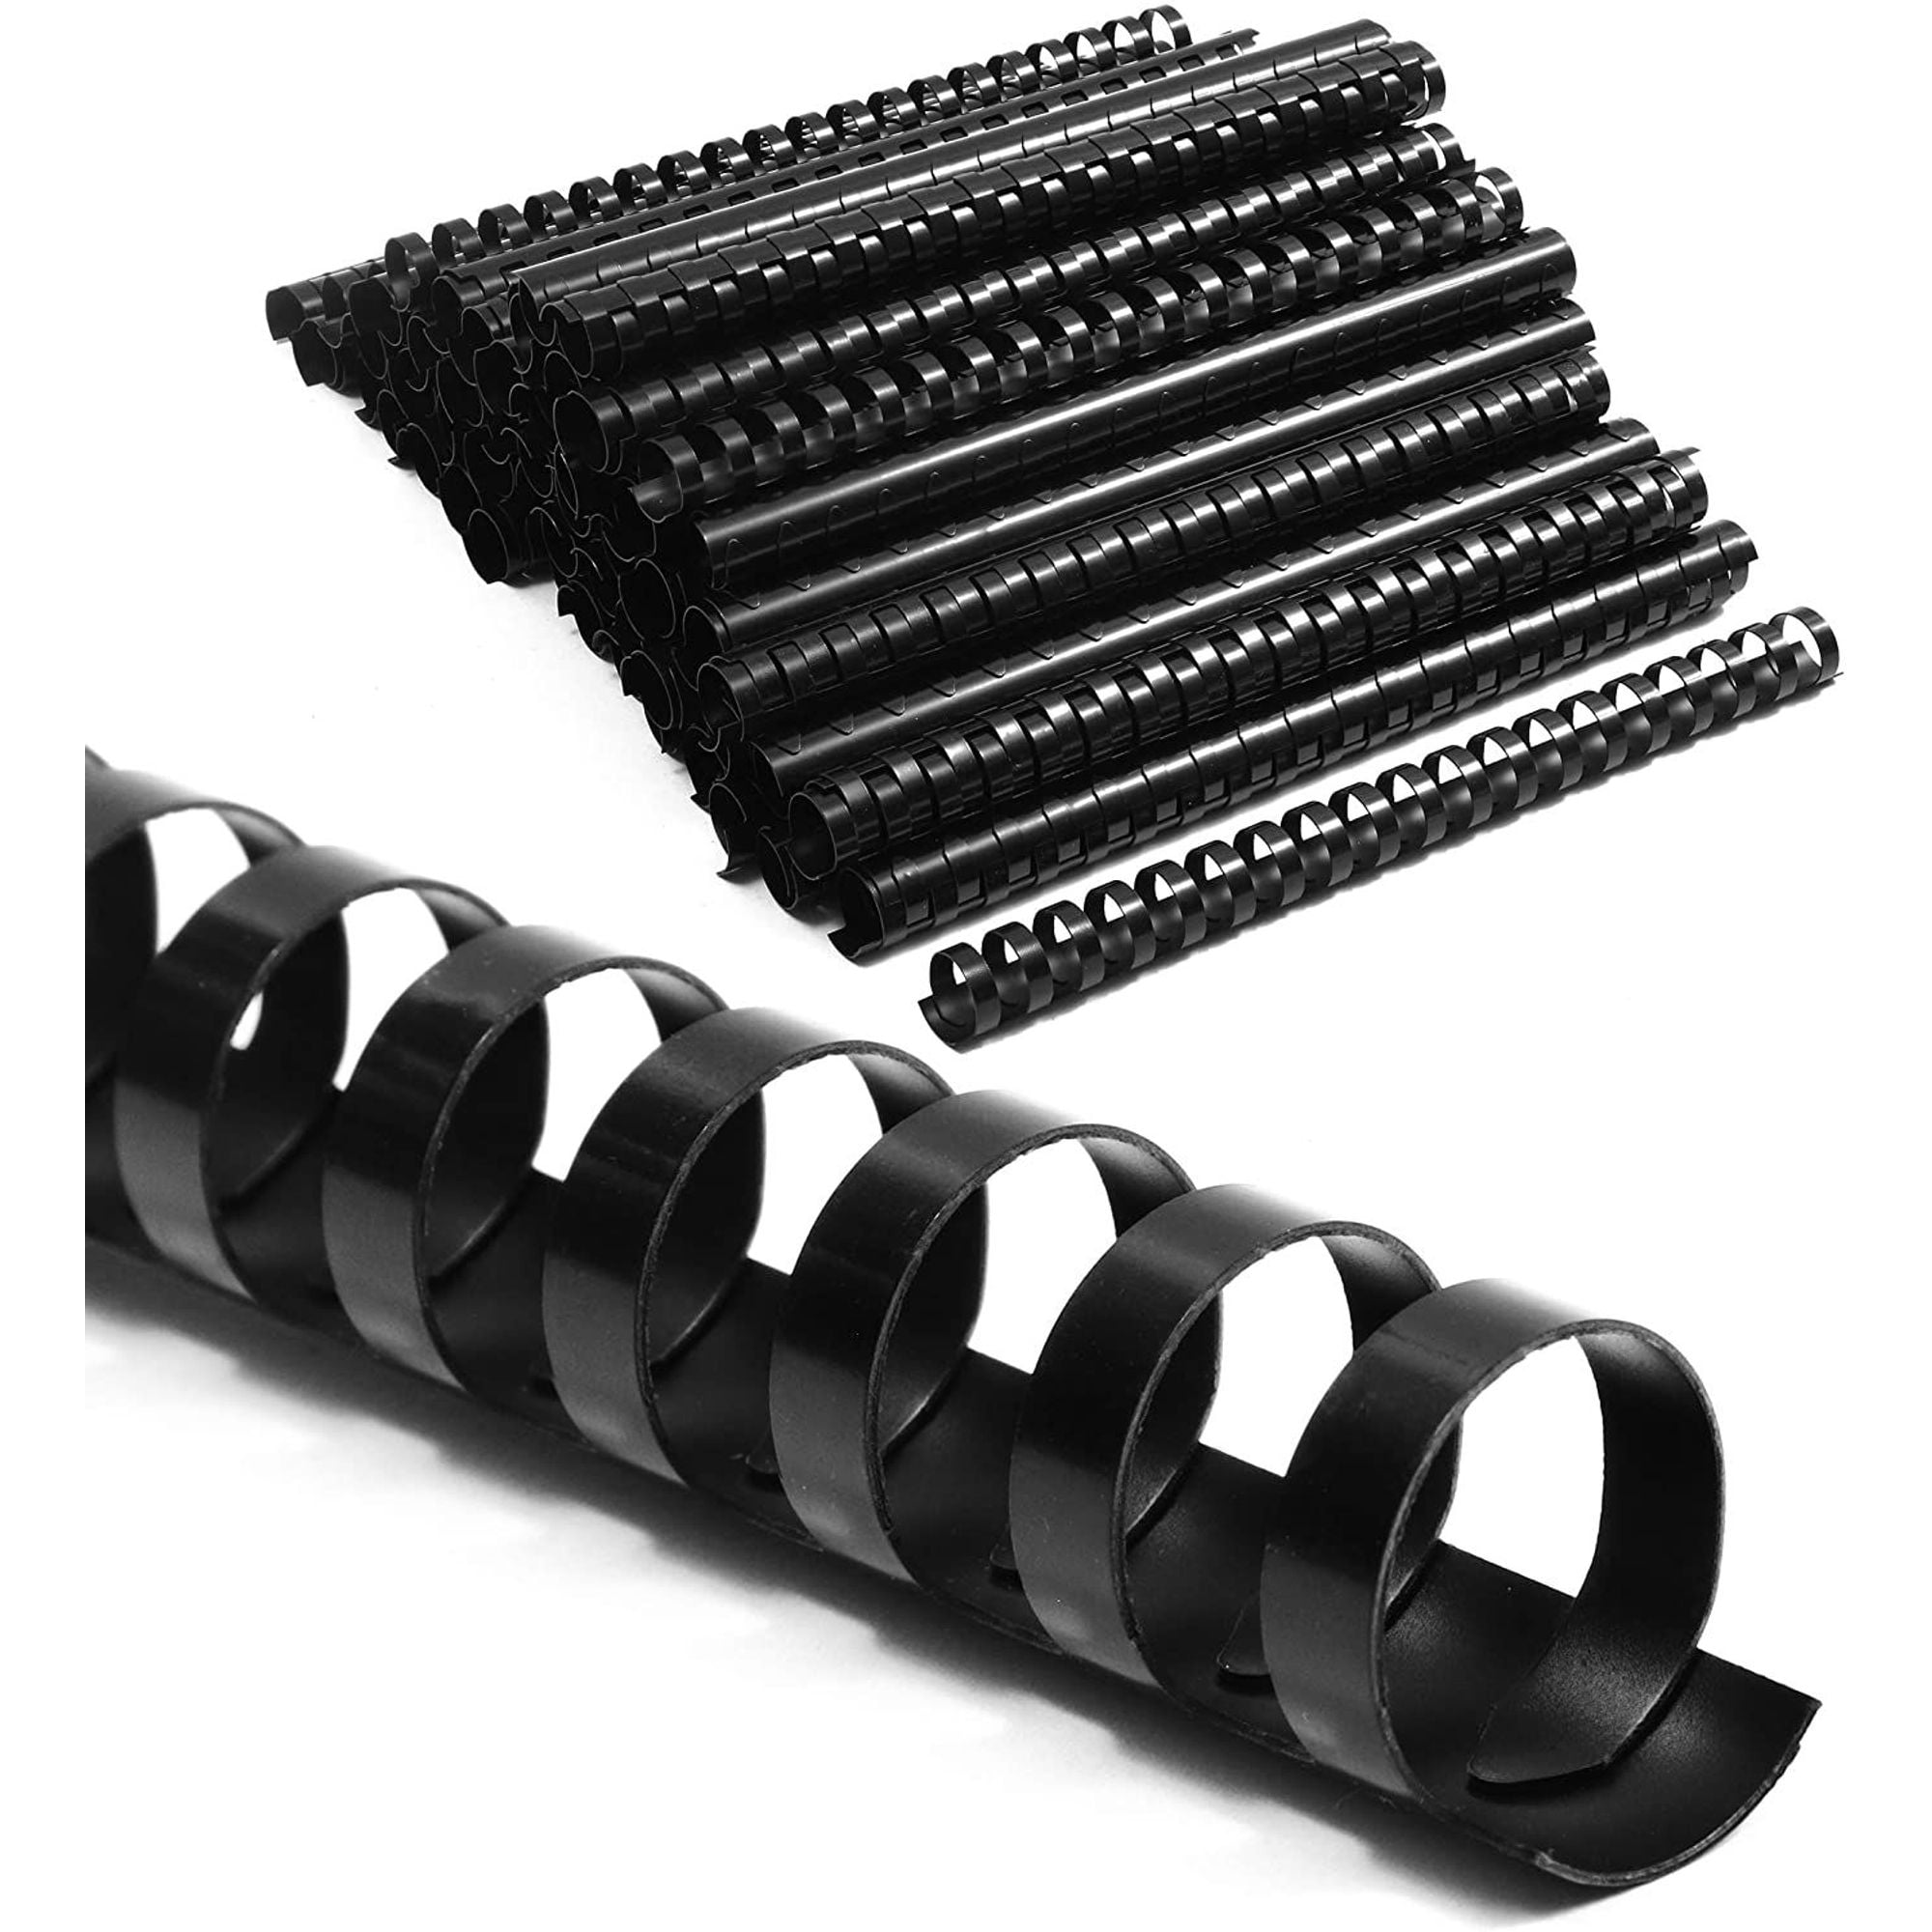 100Count Spiral Binding Combs (19mm, 3/4 inches, Black